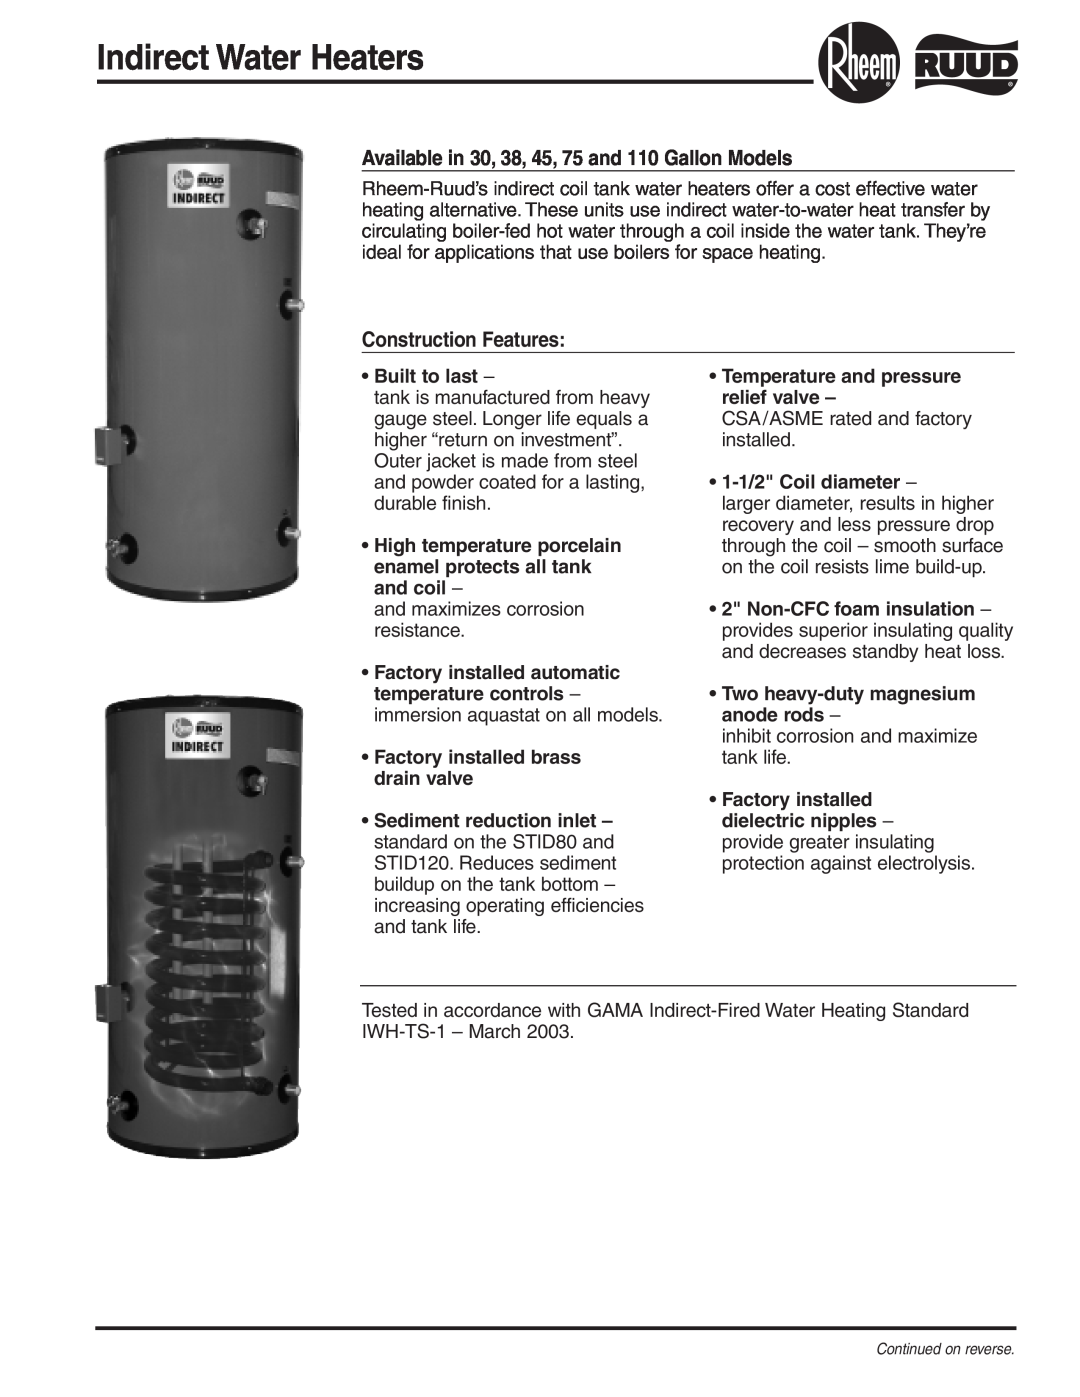 Rheem 38, 75, 45 manual Built to last, High temperature porcelain enamel protects all tank and coil, 1-1/2 Coil diameter 